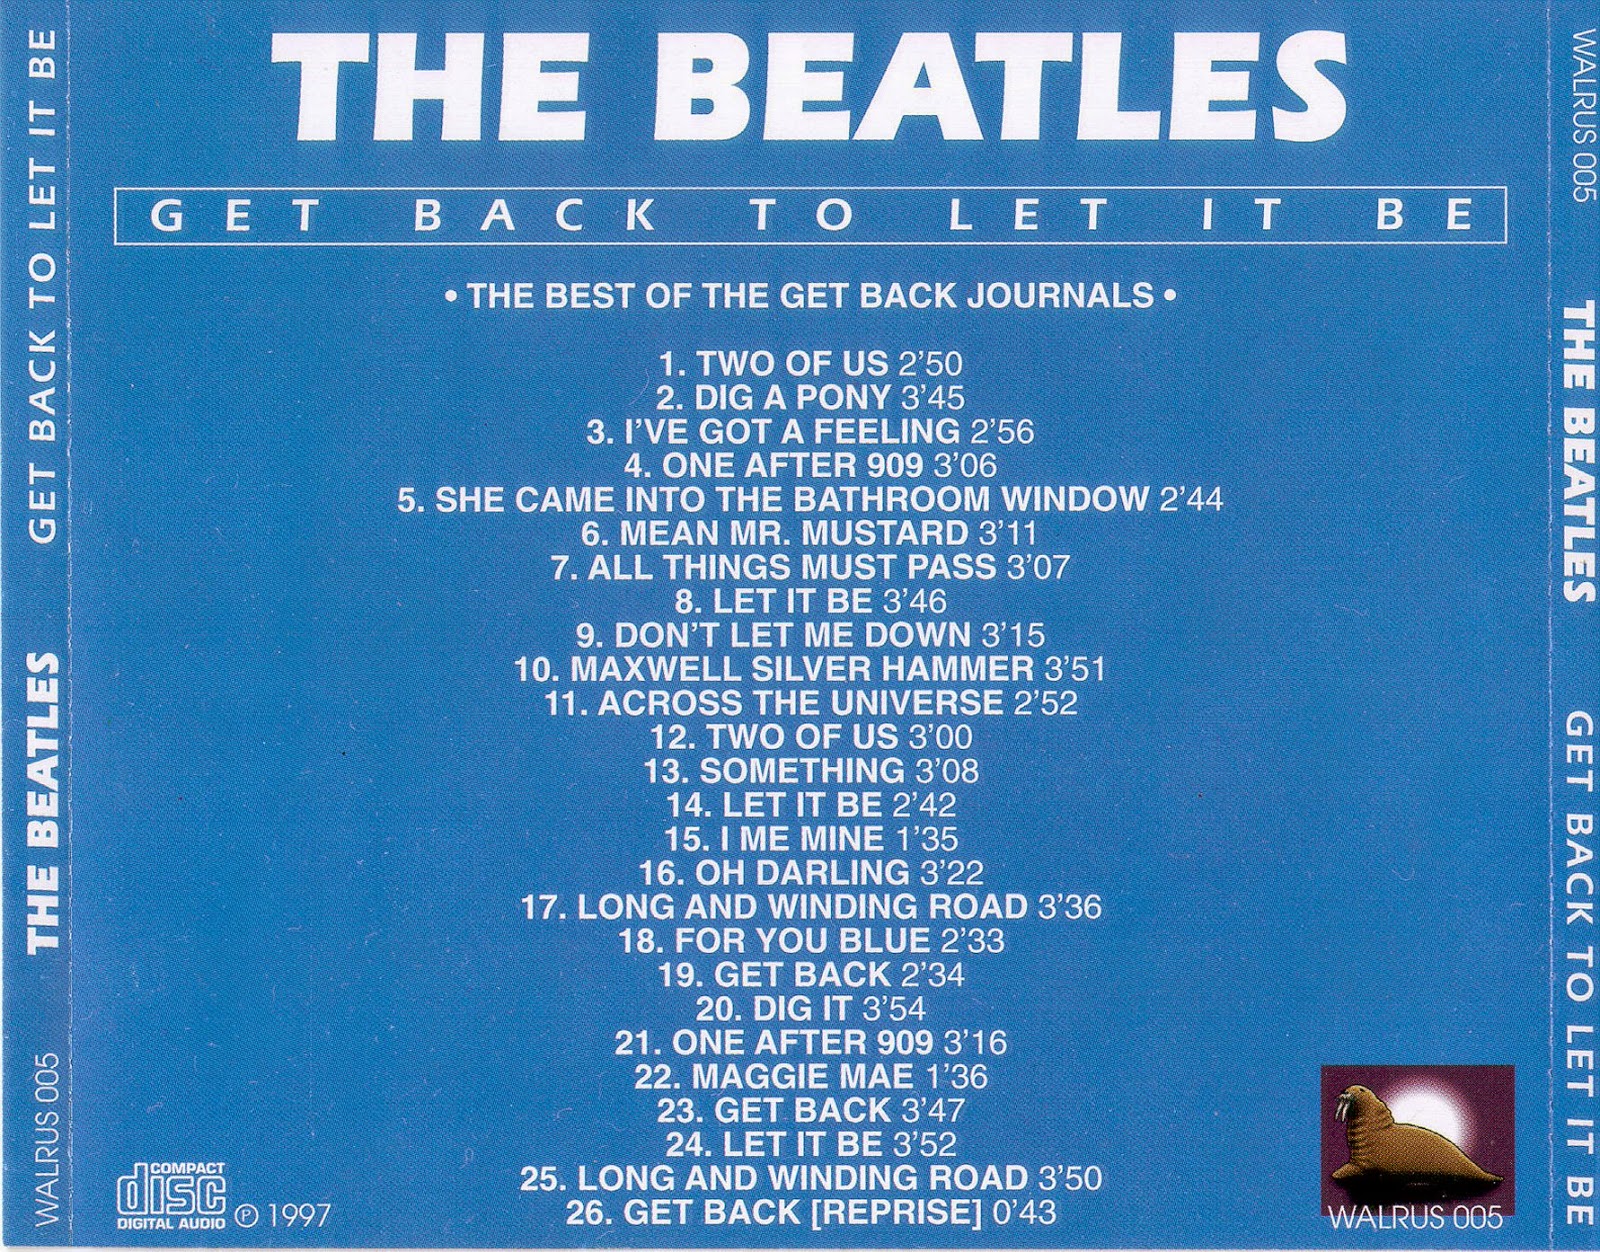 Lets get back. Битлз Let it be. Let it be the Beatles текст. Битлз Let it be текст. Let it be (Beatles album).